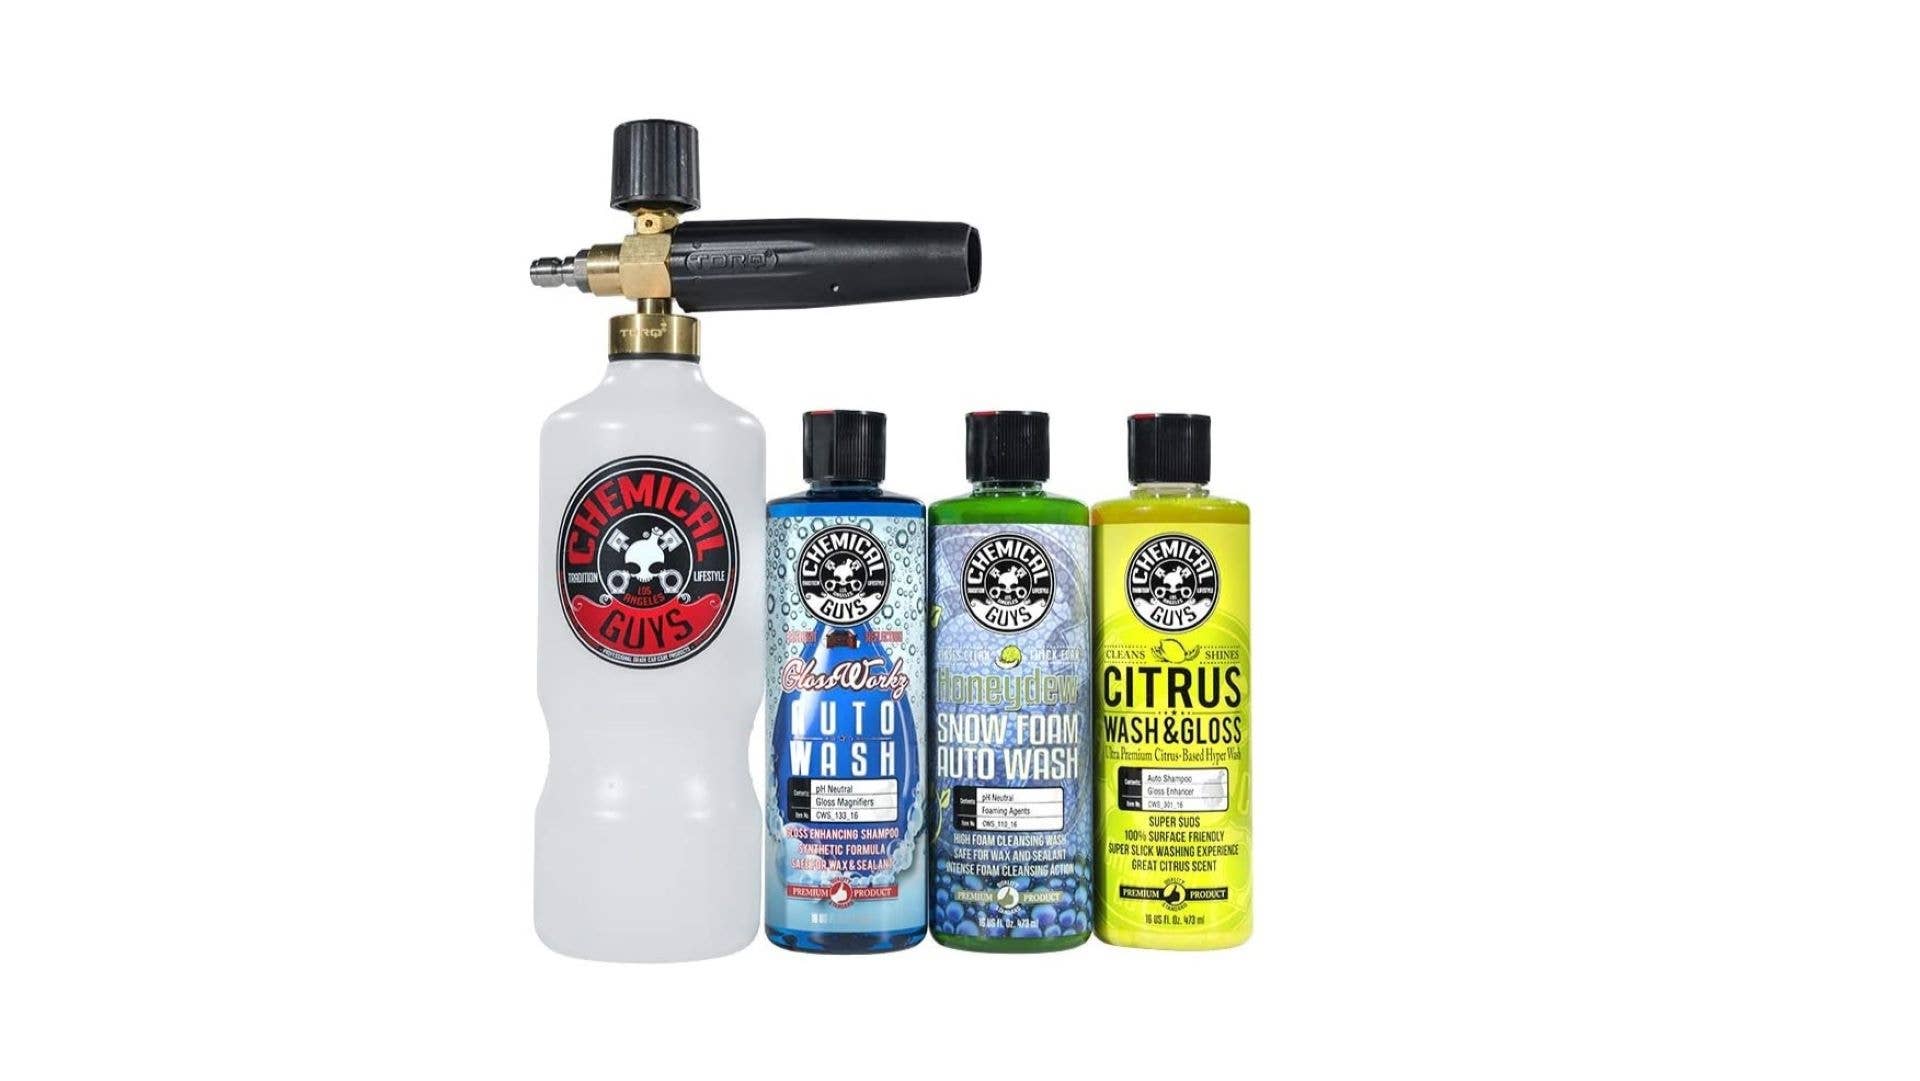 Save 23% On Chemical Guys Foam Cannon and Bring Those Migratory